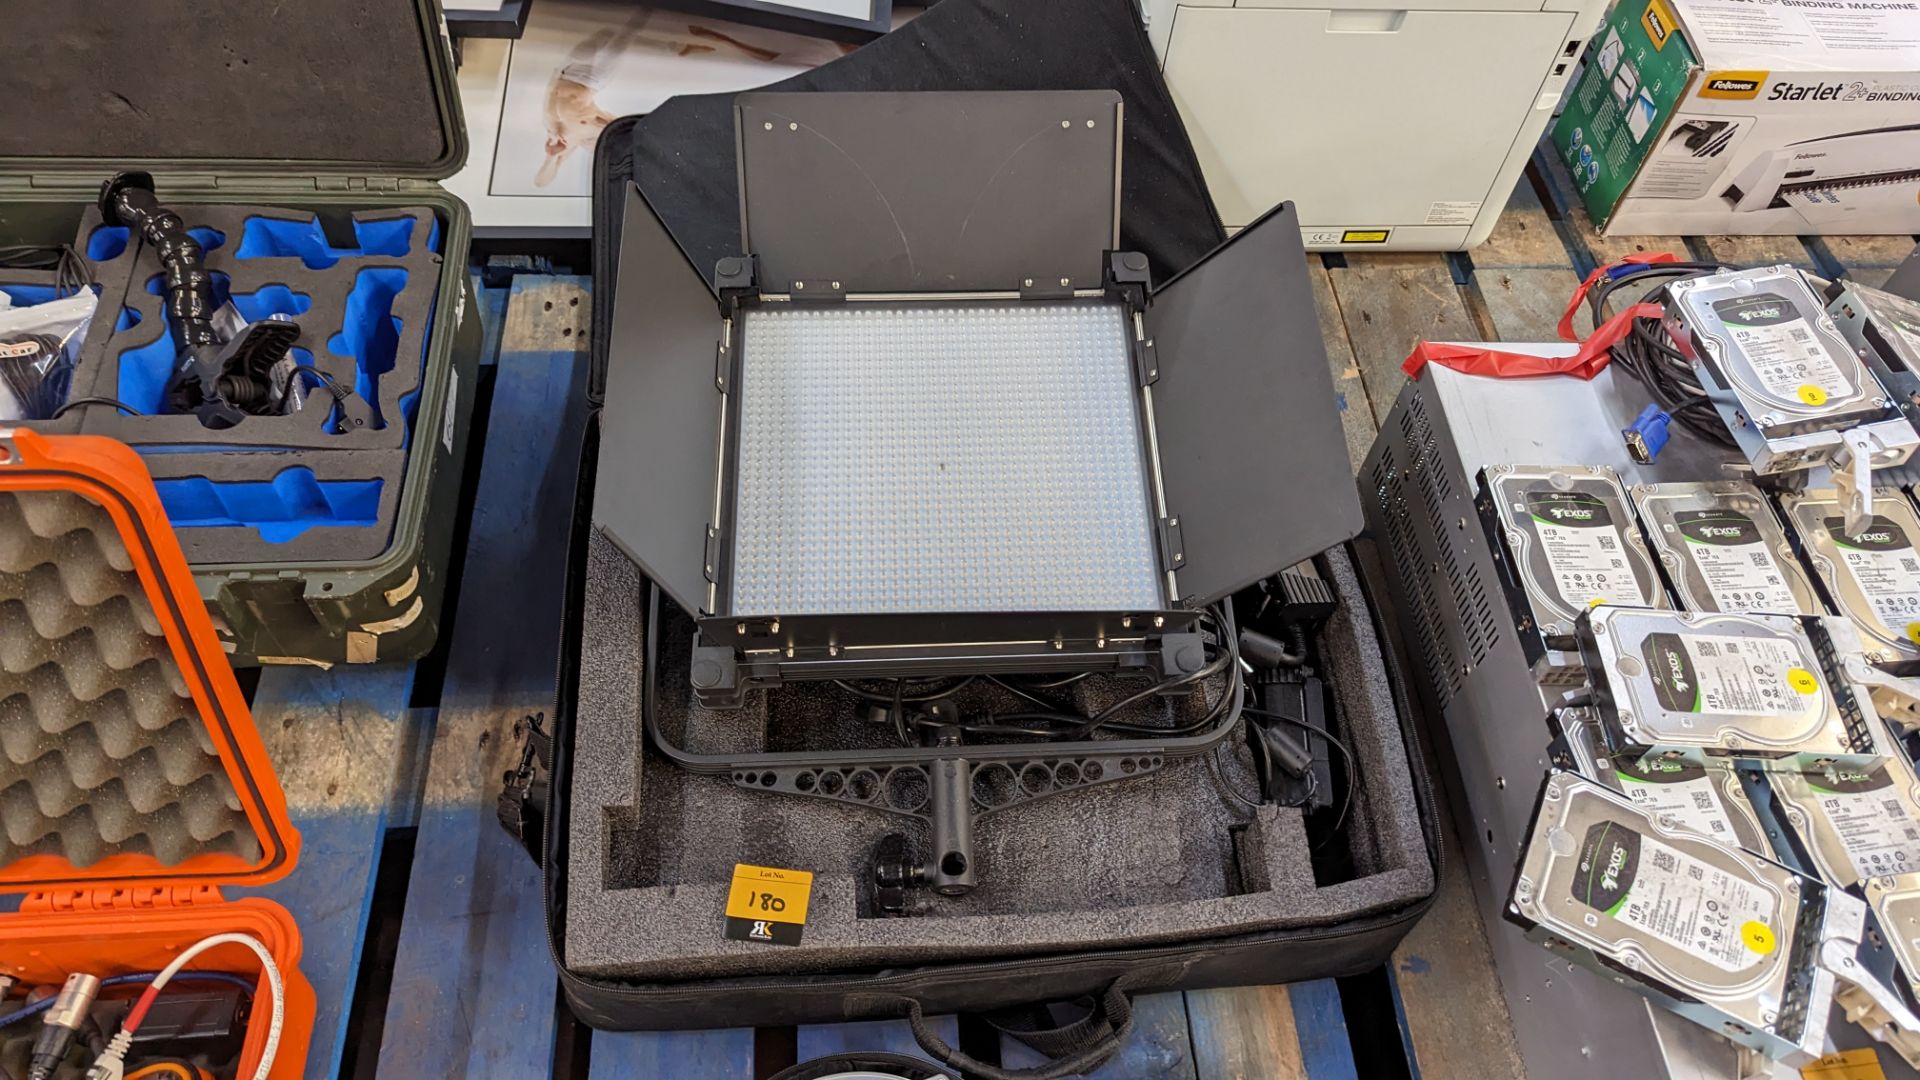 Lishuai light panel with DMX control, including carry case - Image 2 of 14